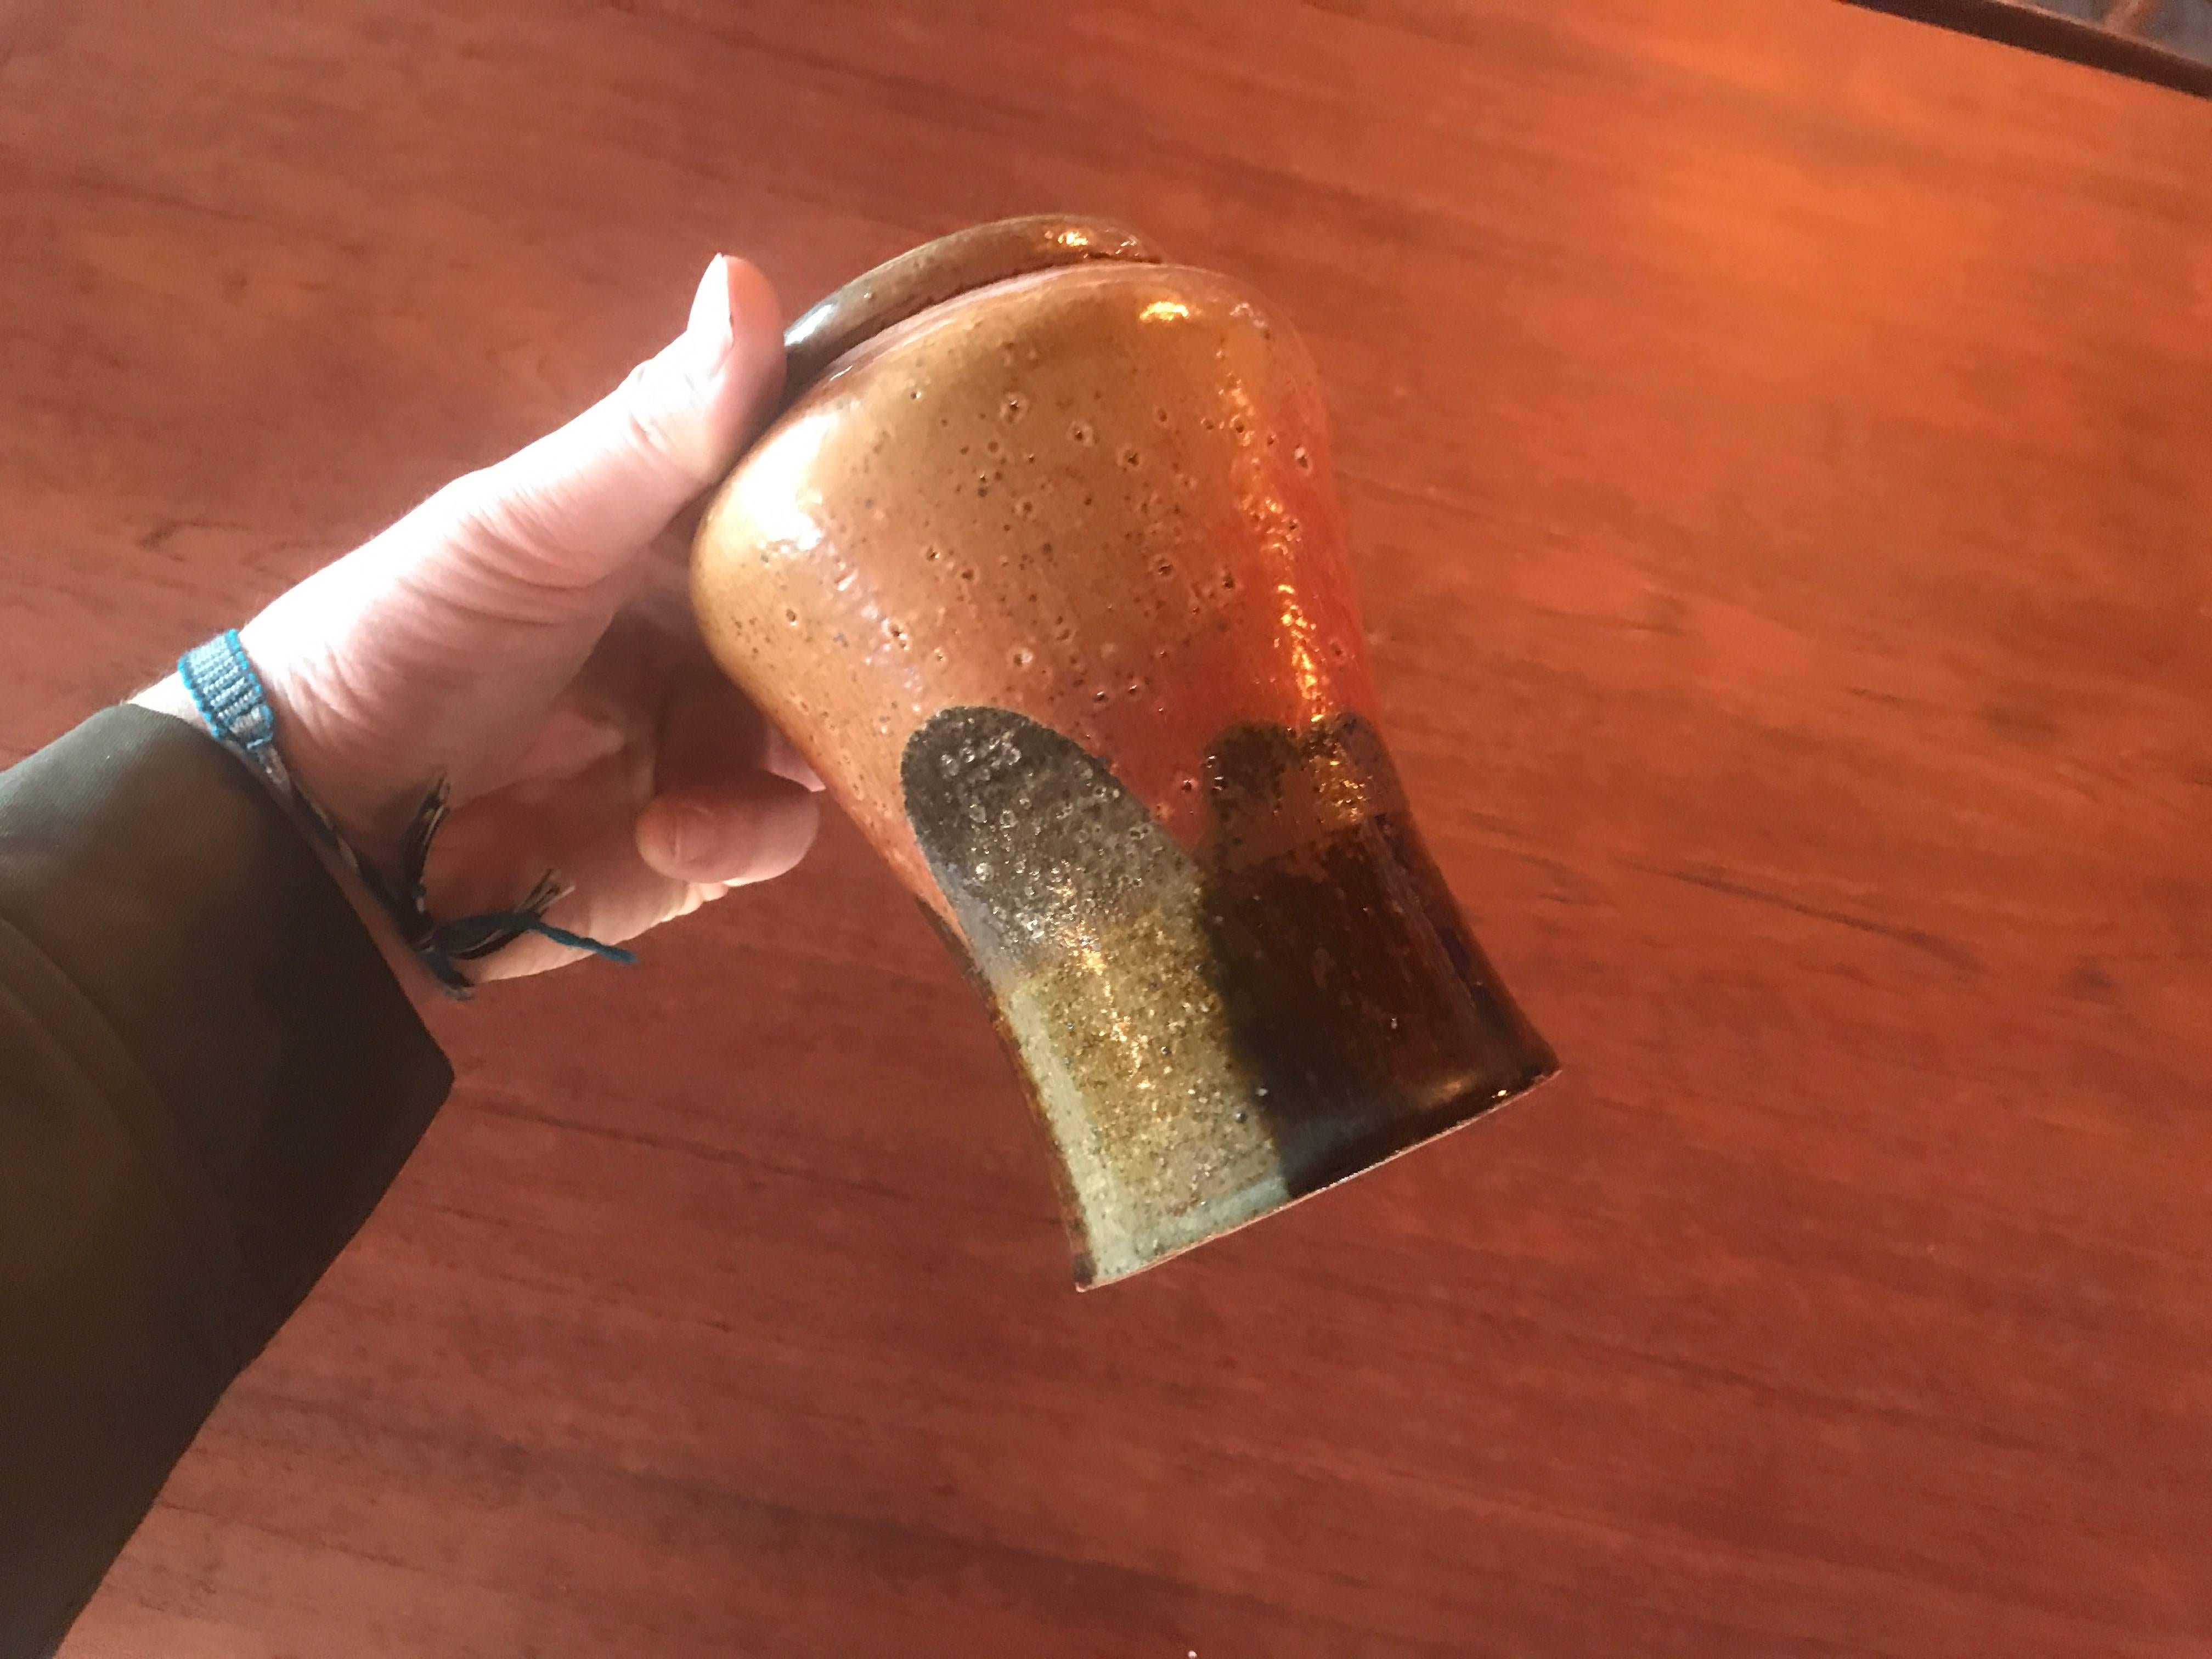 Midcentury Abstract Glaze Vase Ceramic Pot Pottery Art In Excellent Condition For Sale In Salt Lake City, UT